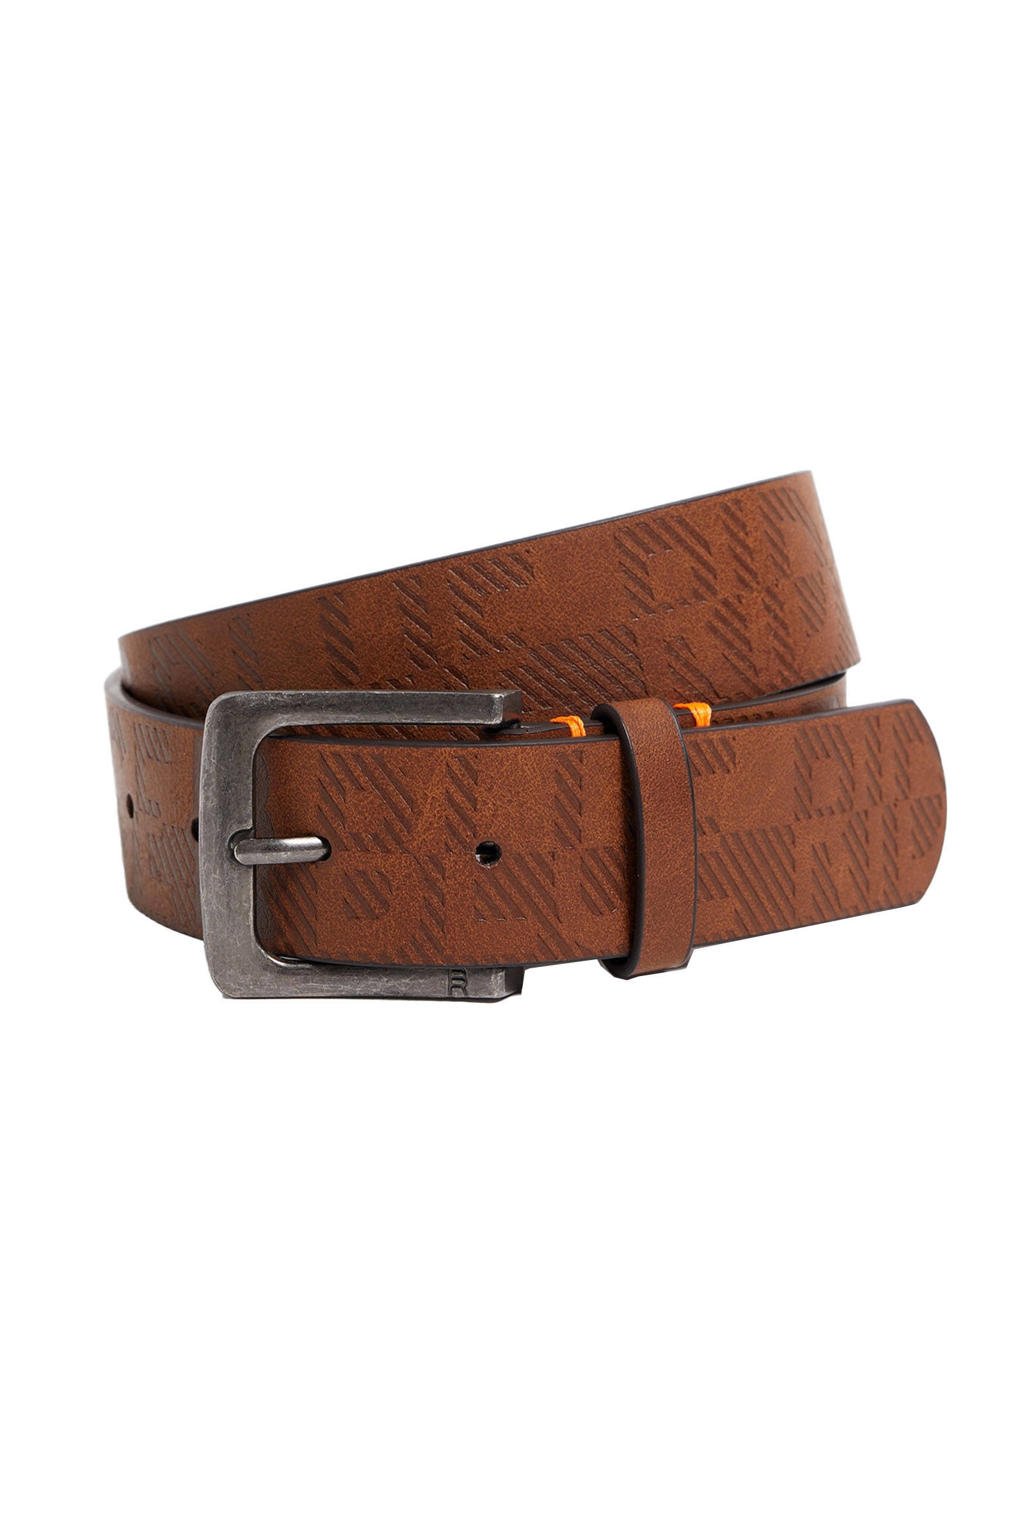 WE Fashion riem met all-over print bruin